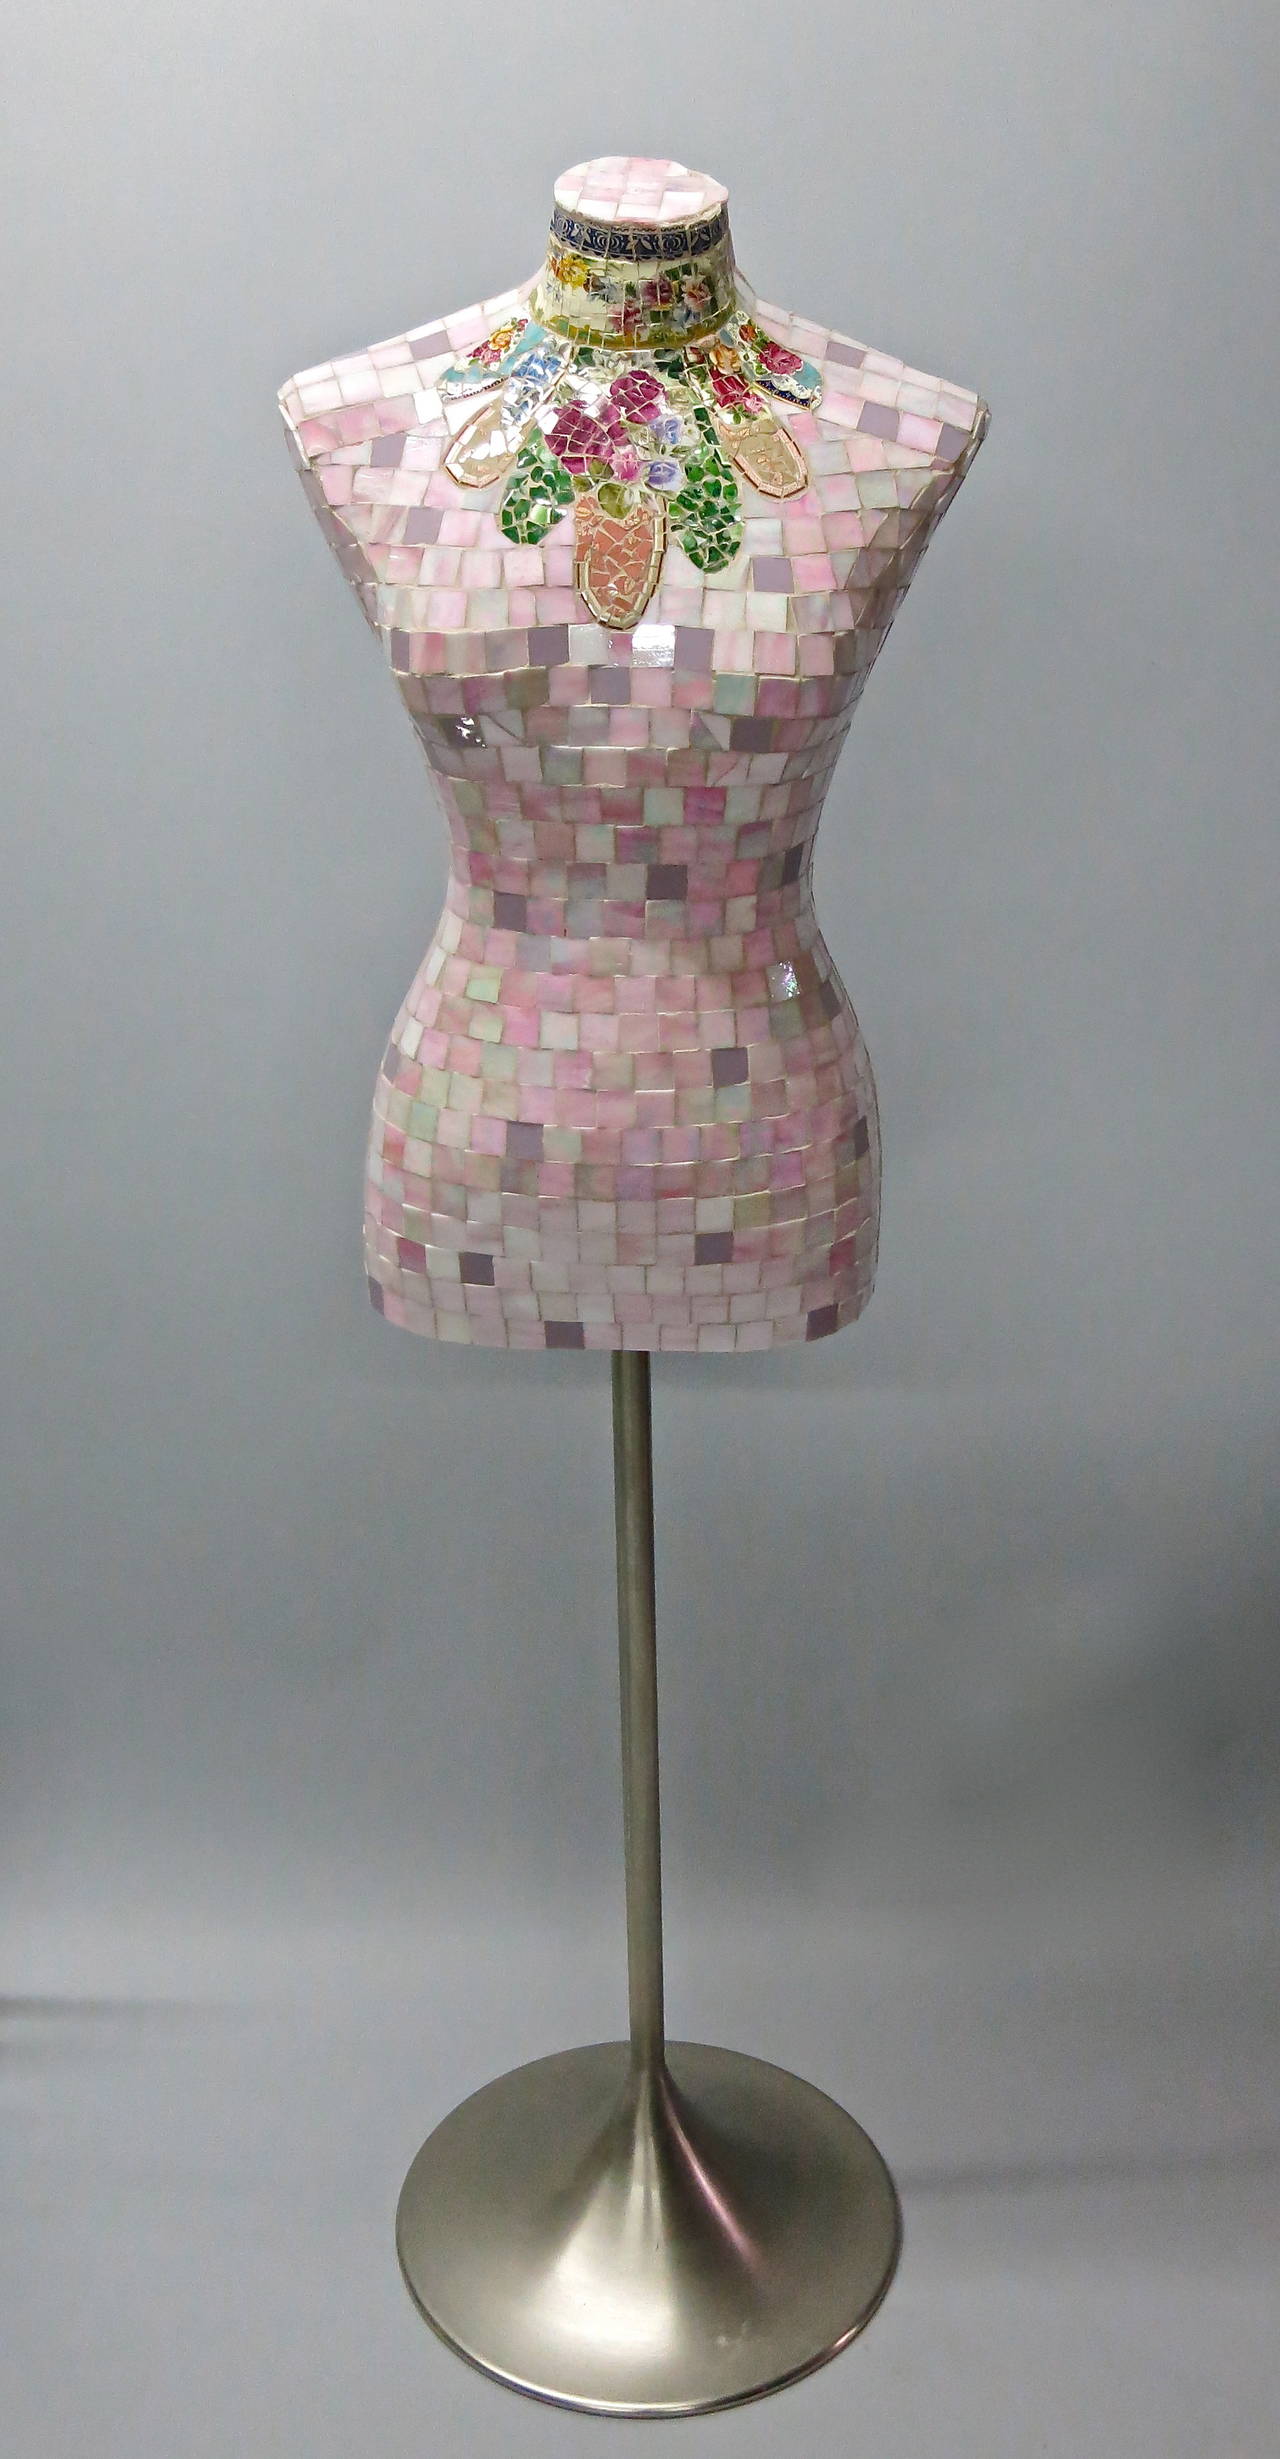 Colorful tiled sculpture with a brushed steel pedestal base has over 1000 ceramic tiles in pink and purple tone that form a female torso supported on a tulip base in brushed steel.